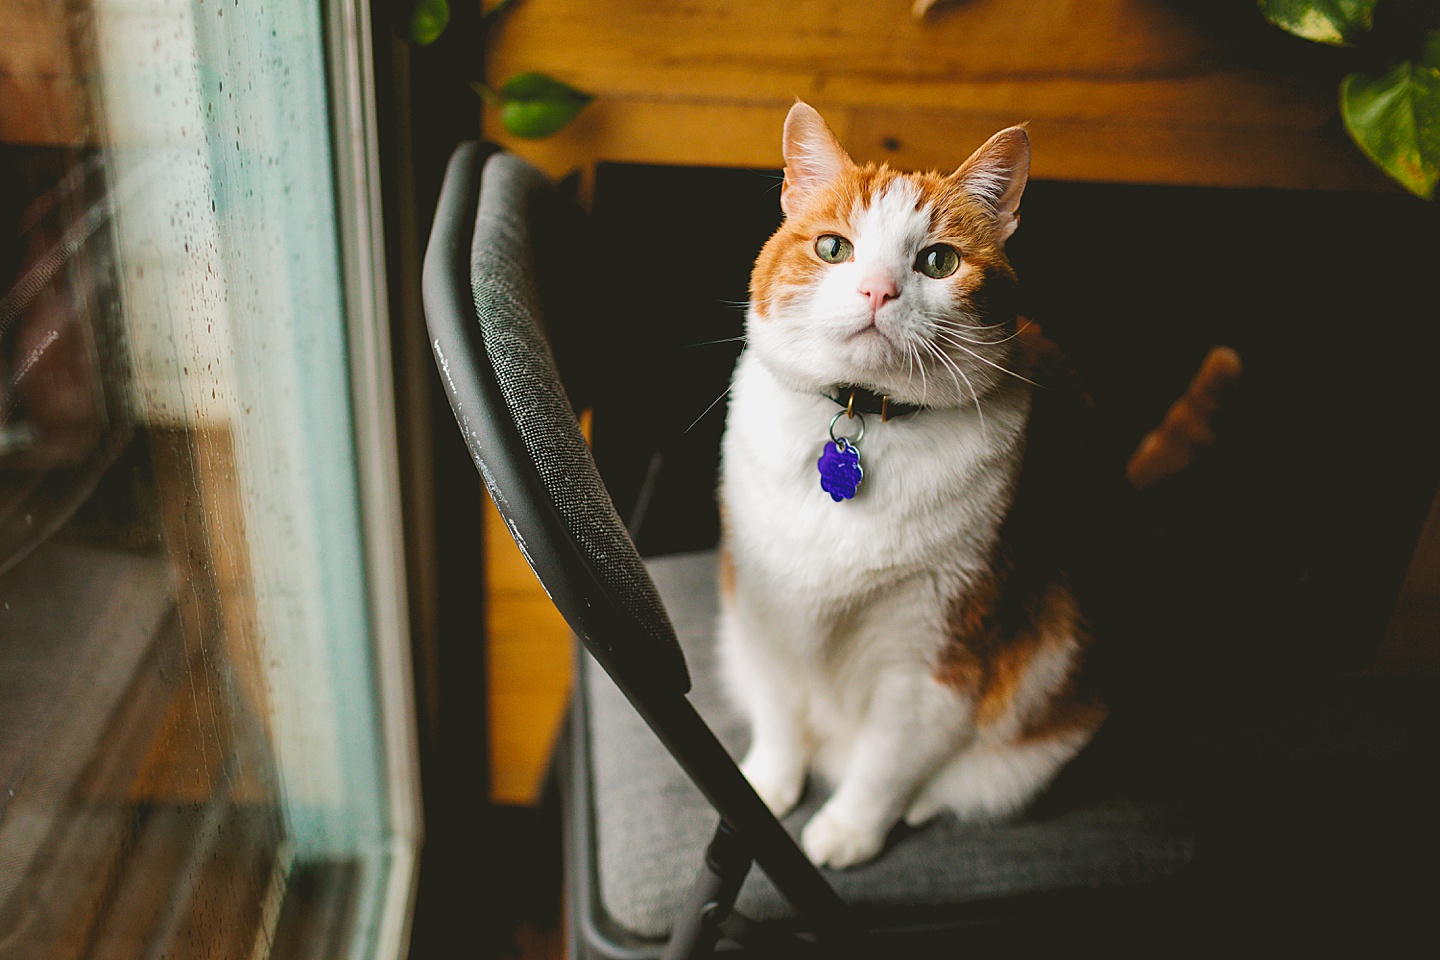 Orange and white tabby cat sitting on chair